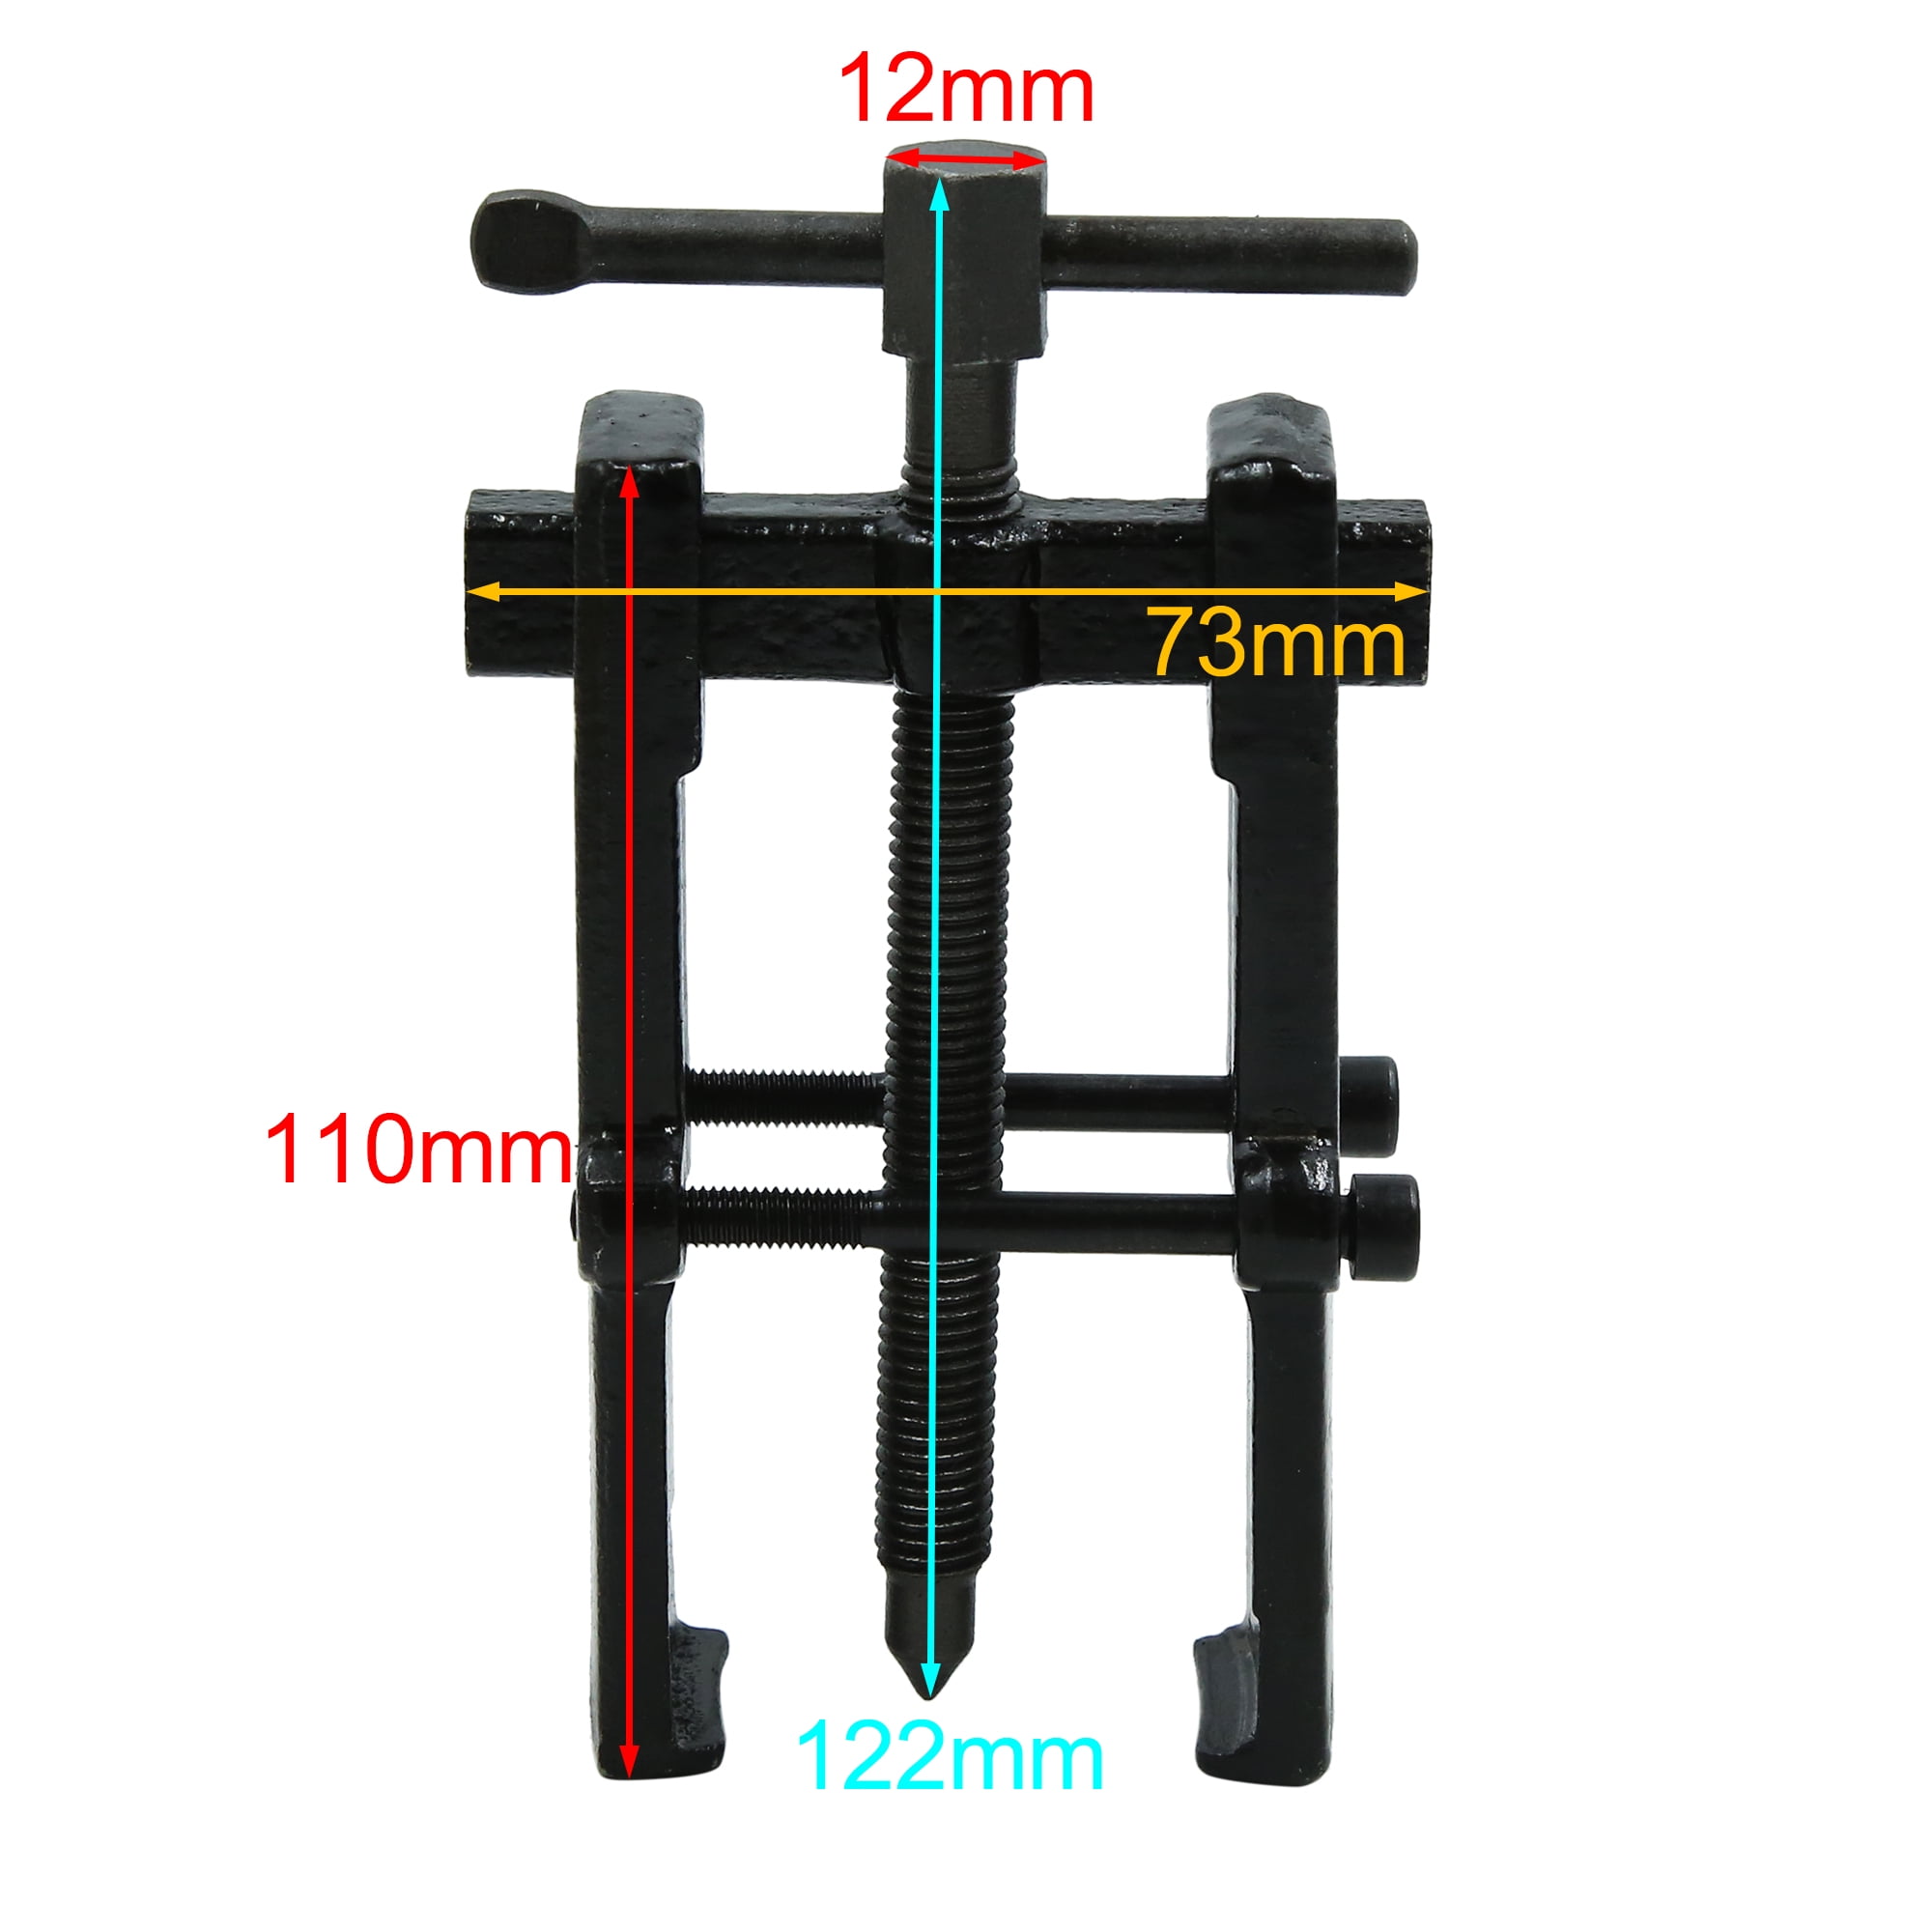 6 Inch 2 Jaw Bearing Puller Auto Motorcycle Car Bushing Remover Extractor Tools 